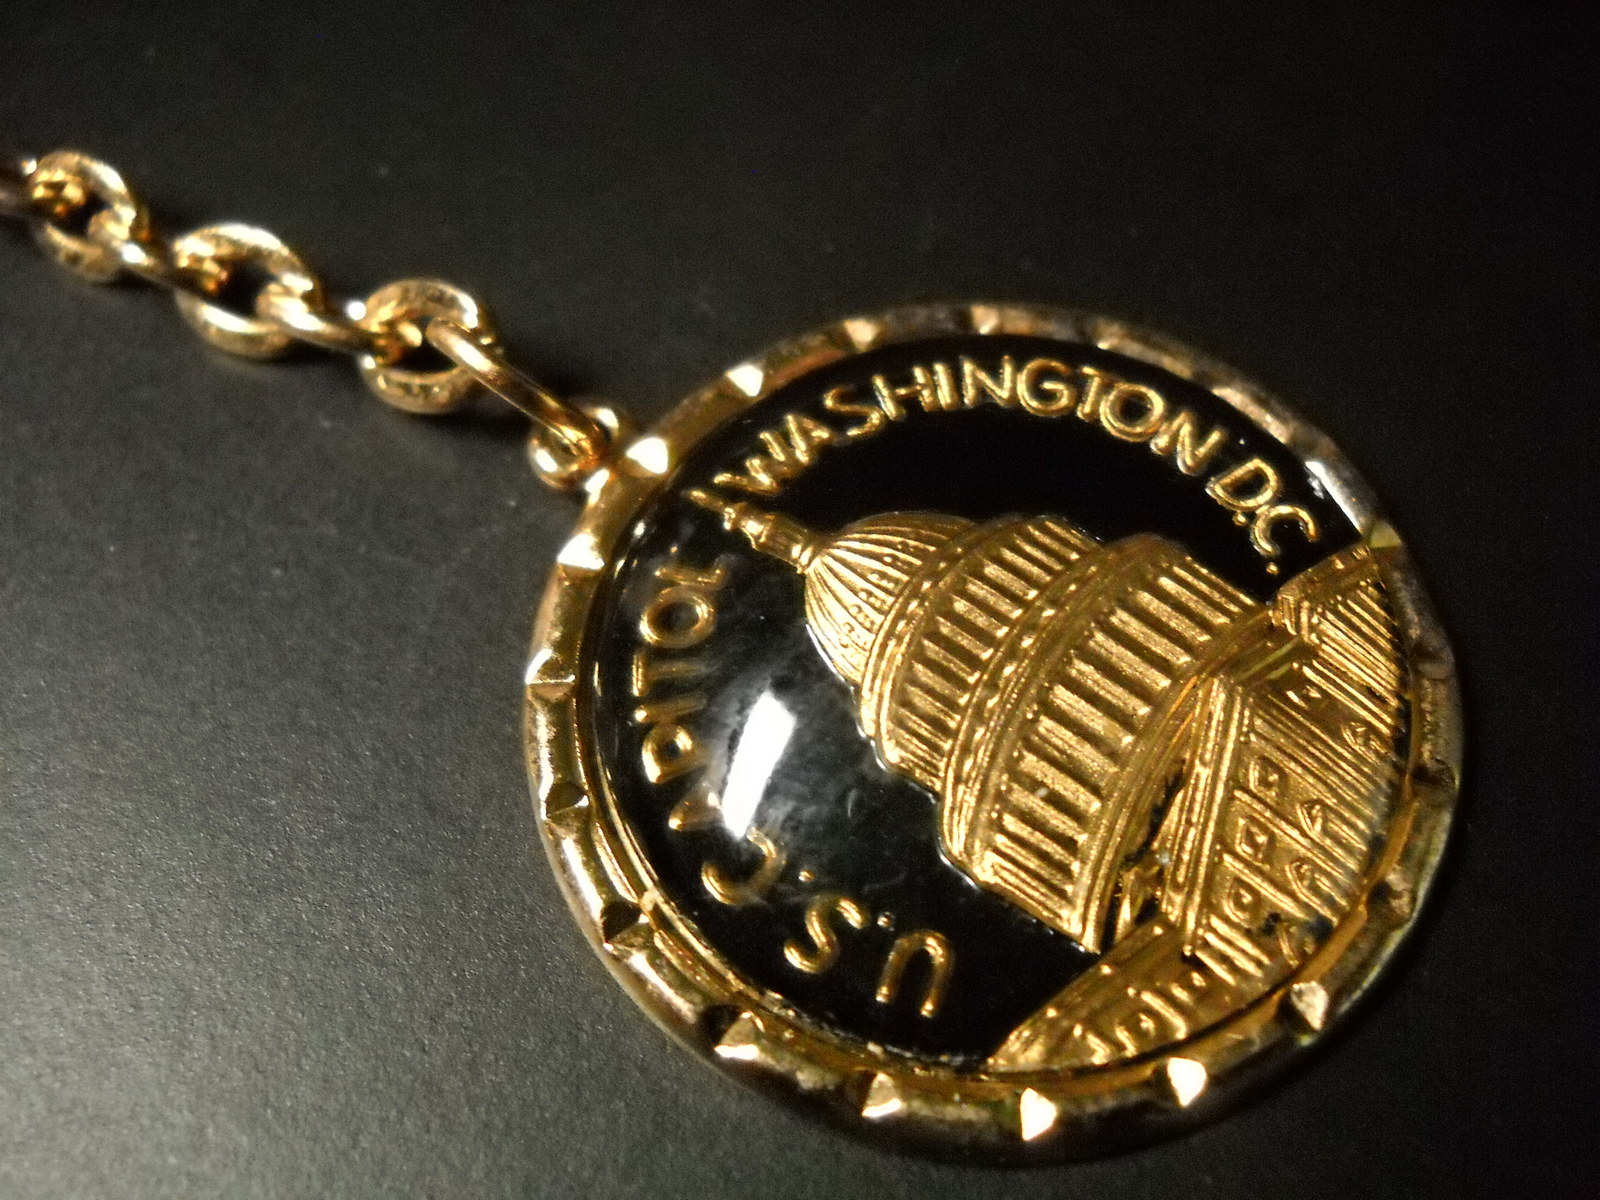 US Capitol Washington DC Key Chain Capitol Building Gold Colored Metal on Black - $6.99